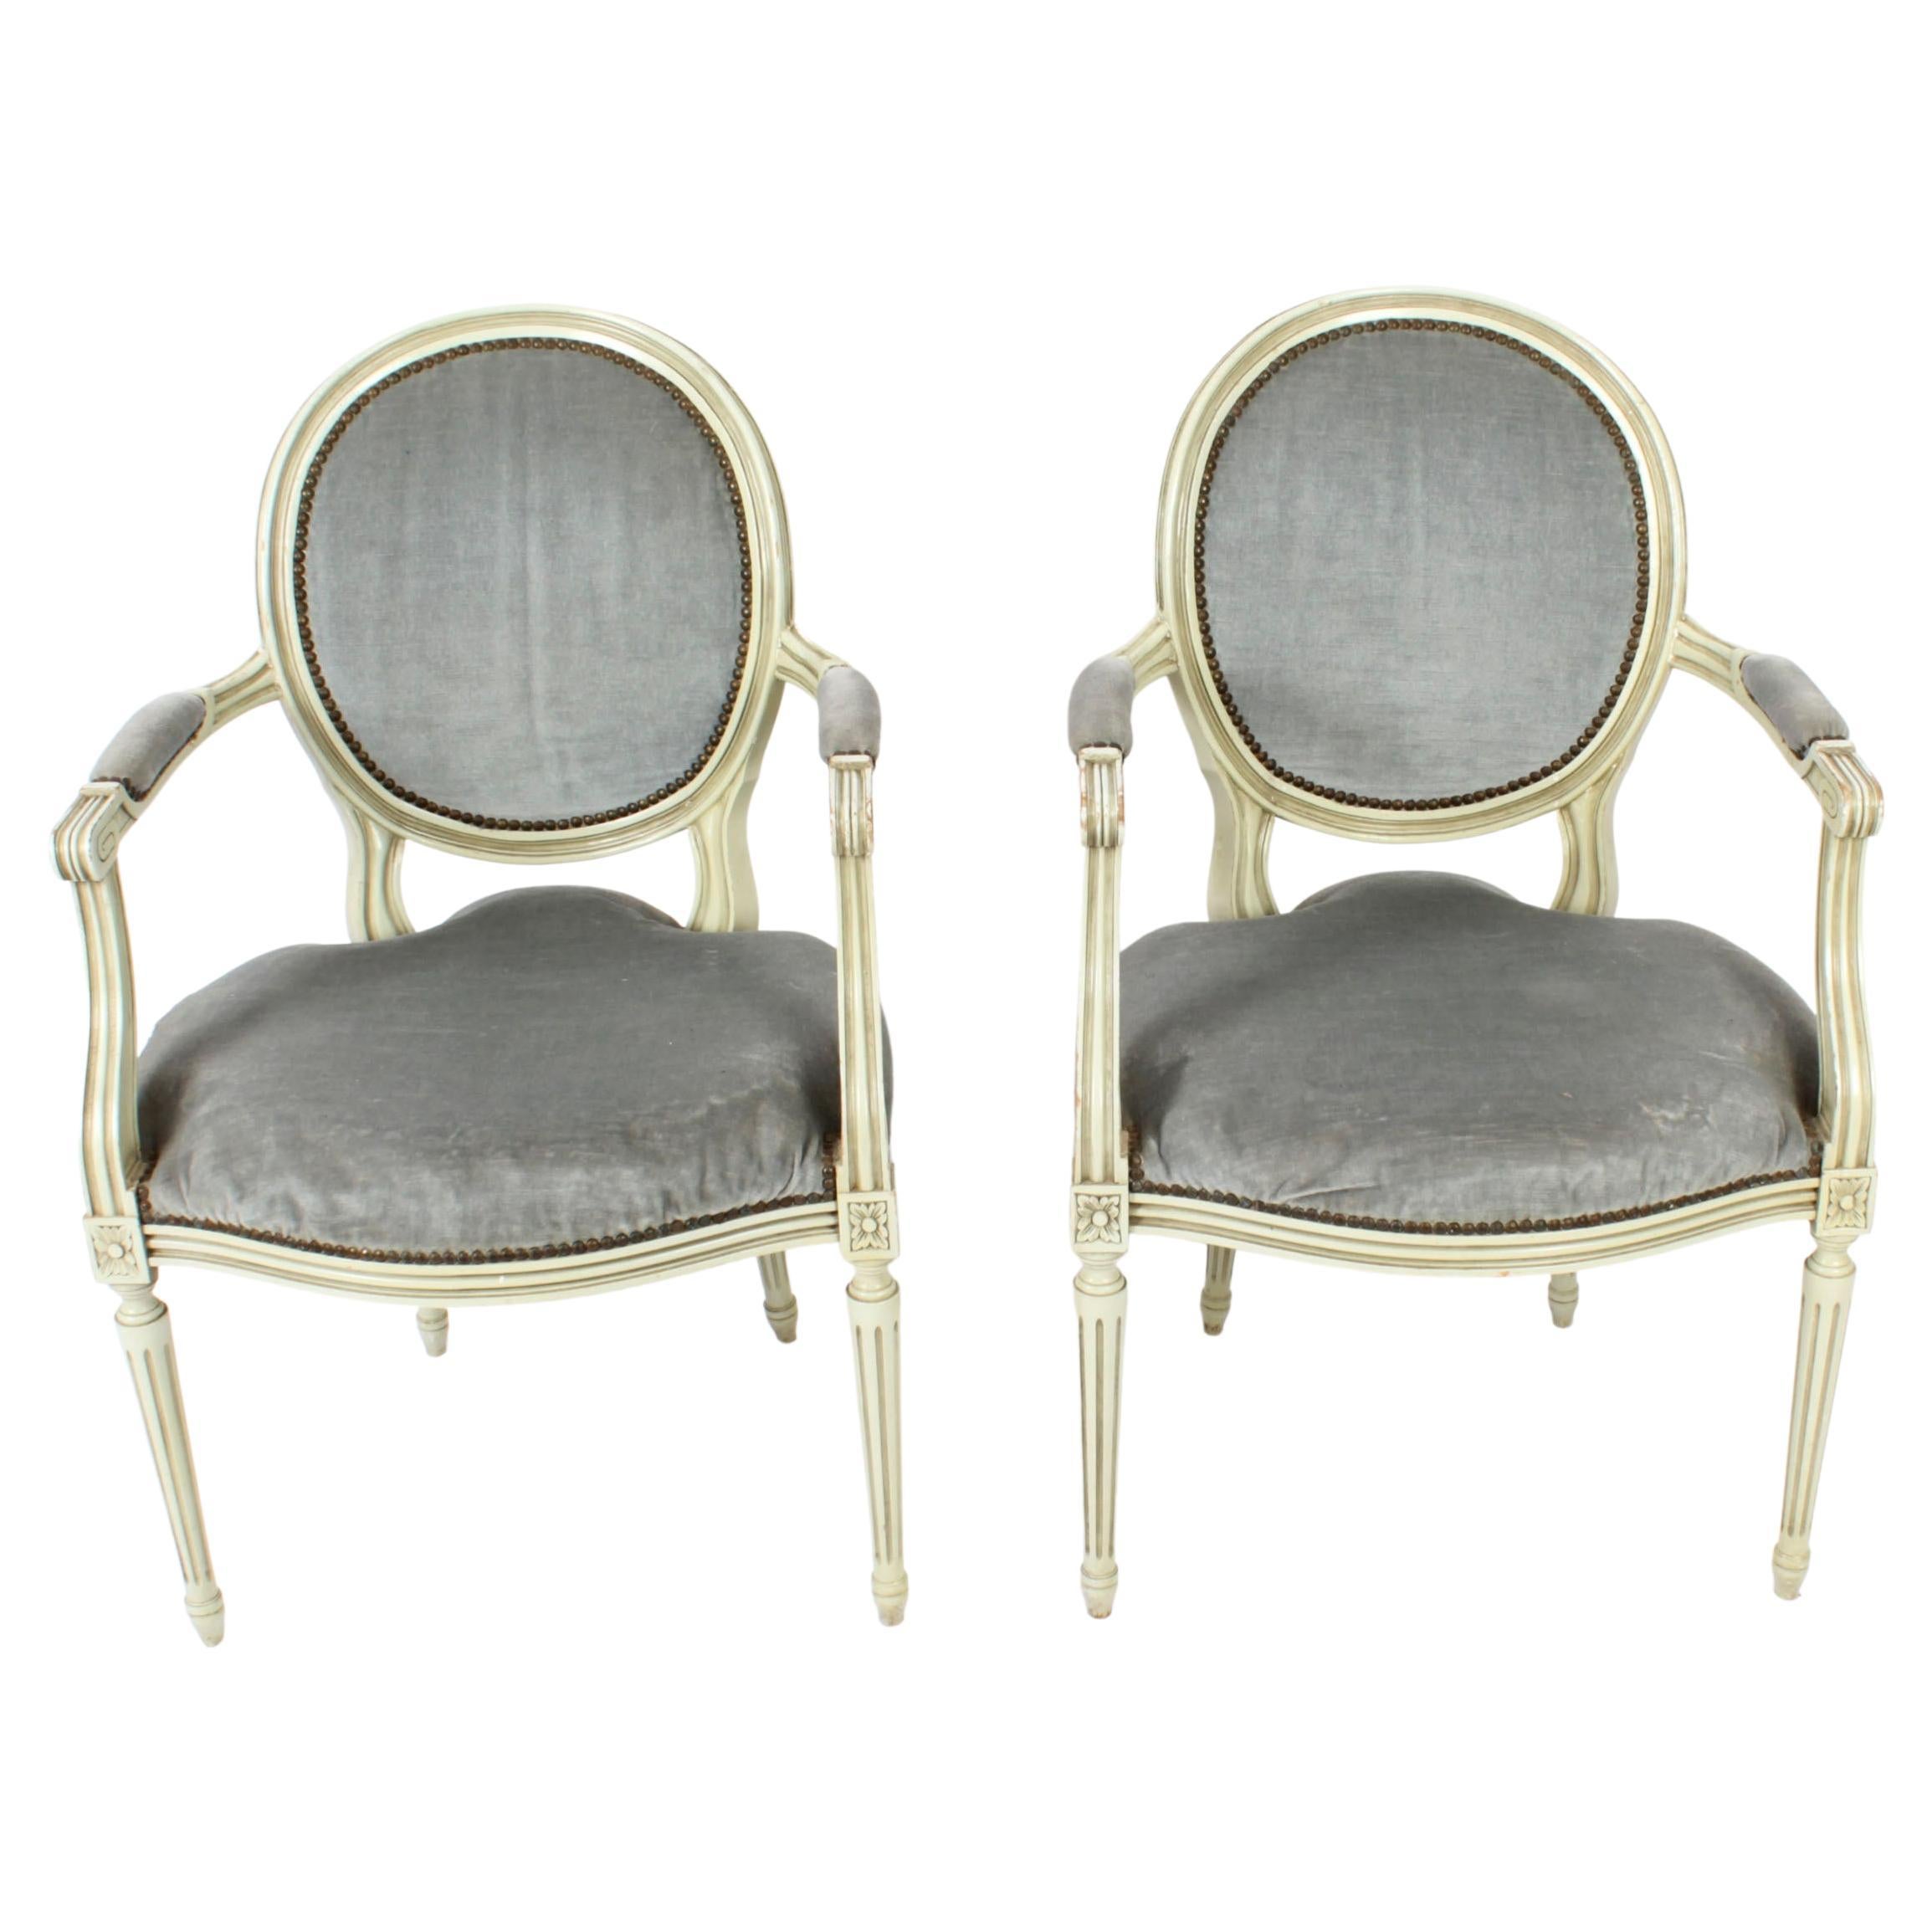 Antique Pair French Louis XVI Revival Painted Armchairs, Early 20th Century